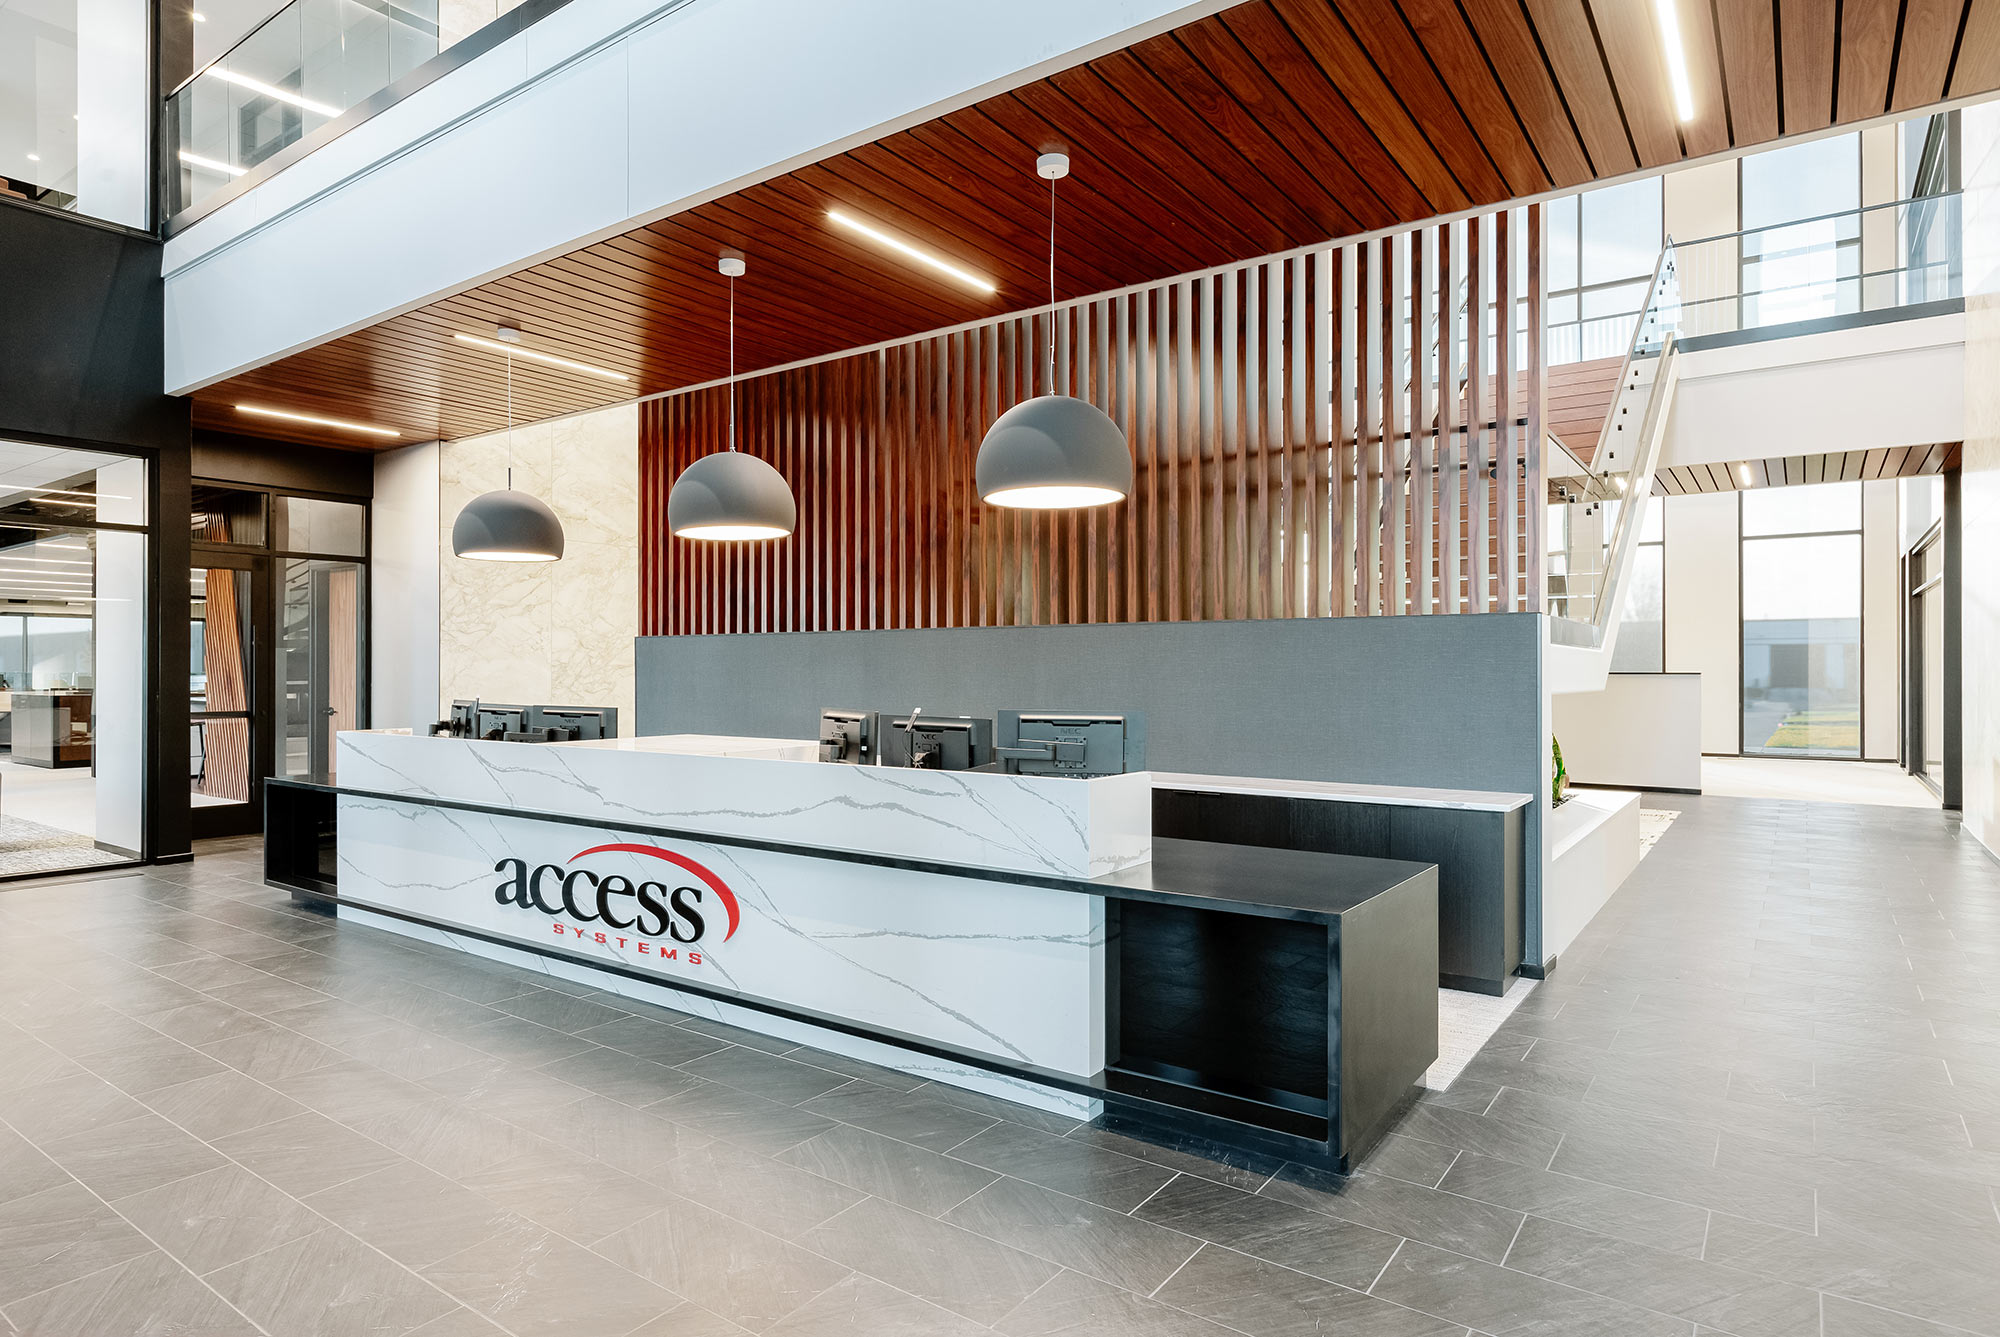 Image of CKF Access Systems 10 in Dekton and Silestone Offer High-End Finishes to the Access Systems Headquarters - Cosentino